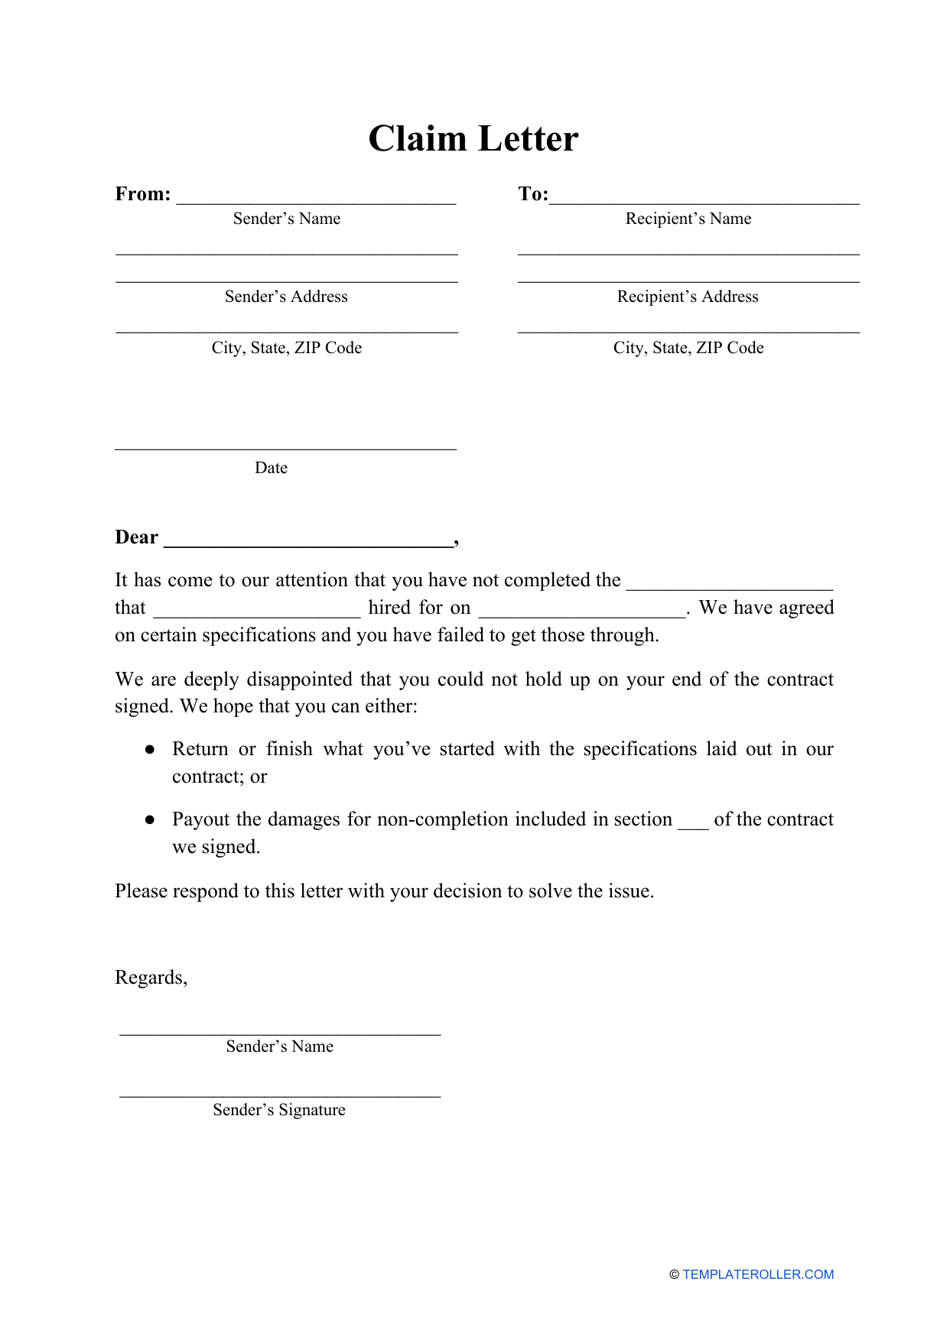 Claim Letter Template - Document Preview